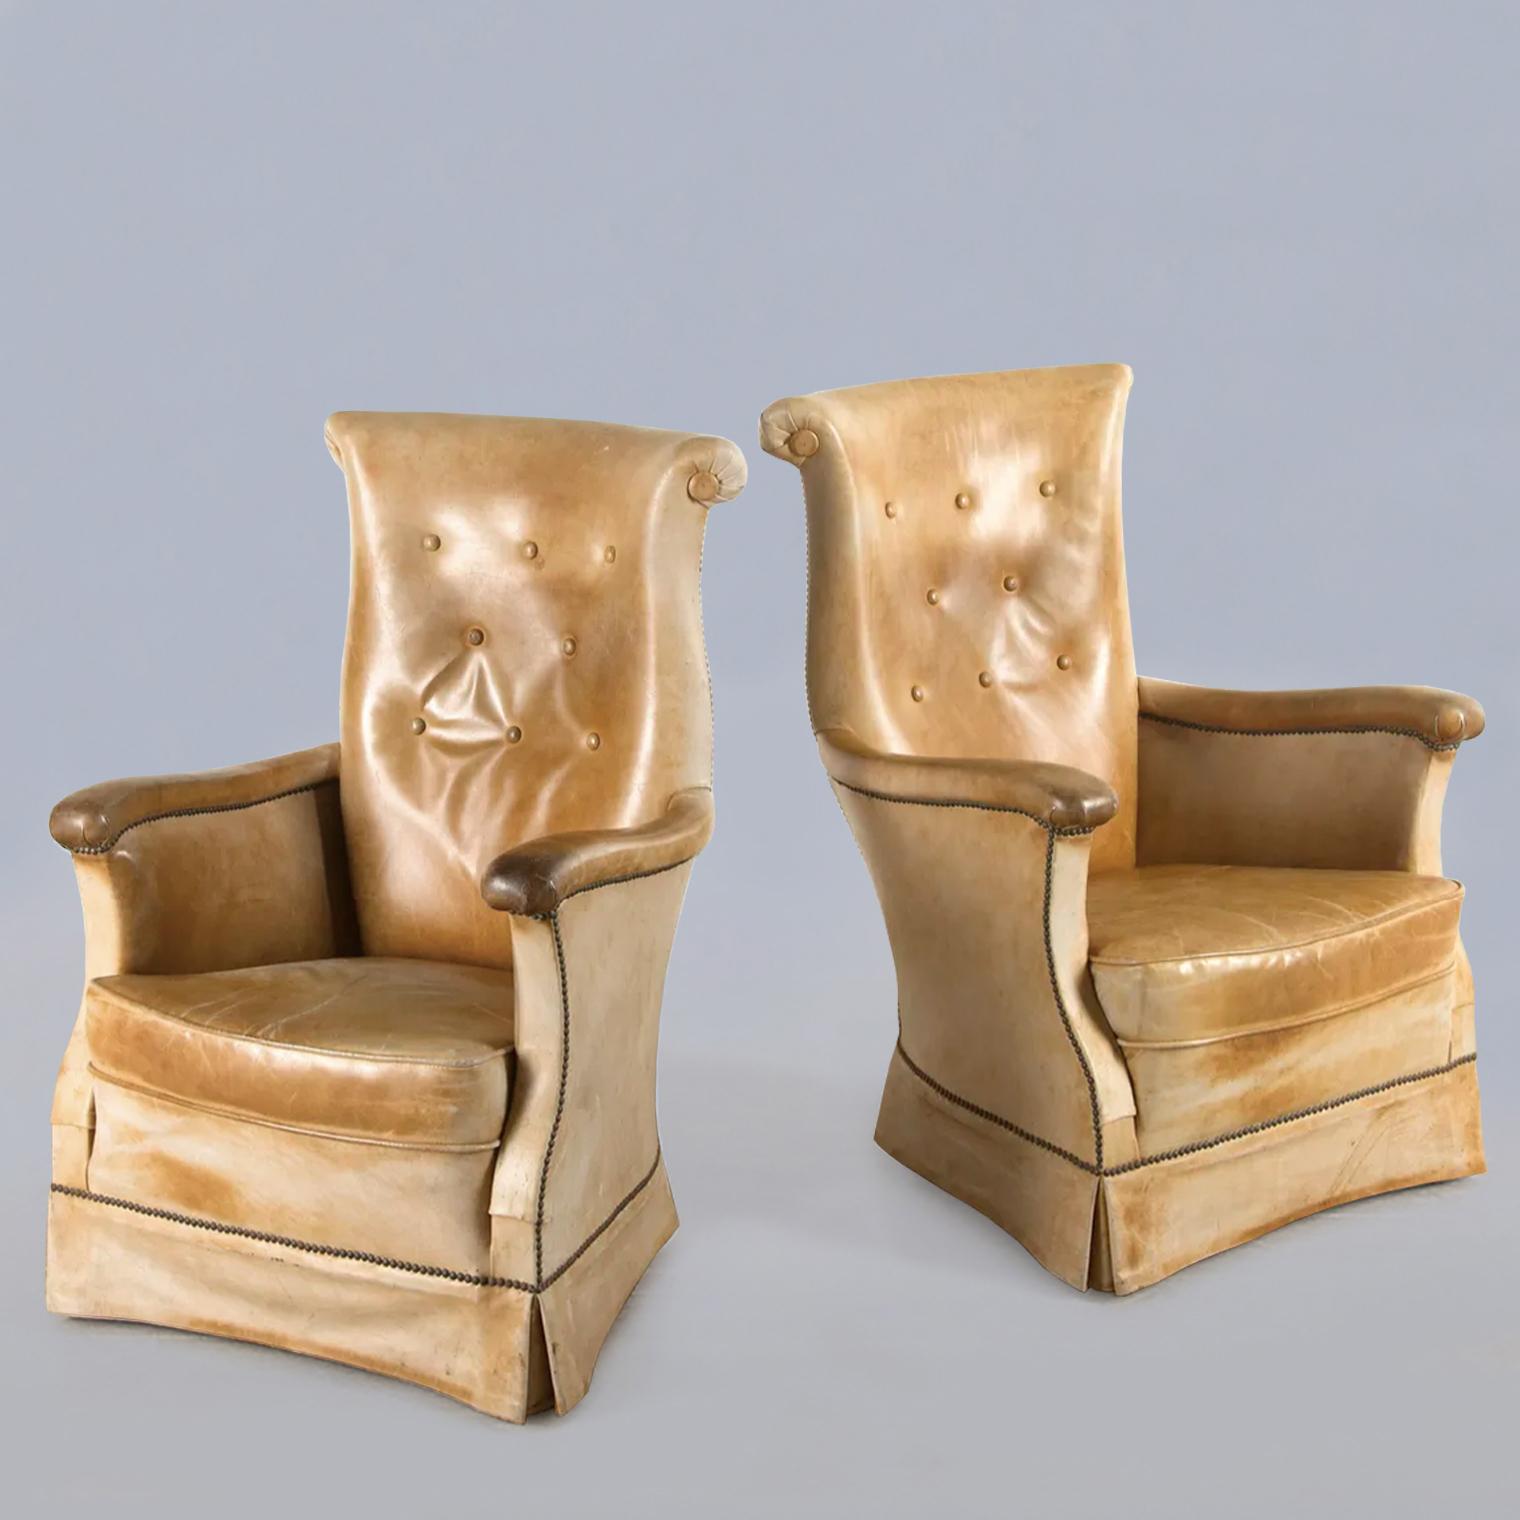 Wonderful French armchairs in beautiful pale tan leather and slim arms and back. Extremely comfortable and stylish.
 